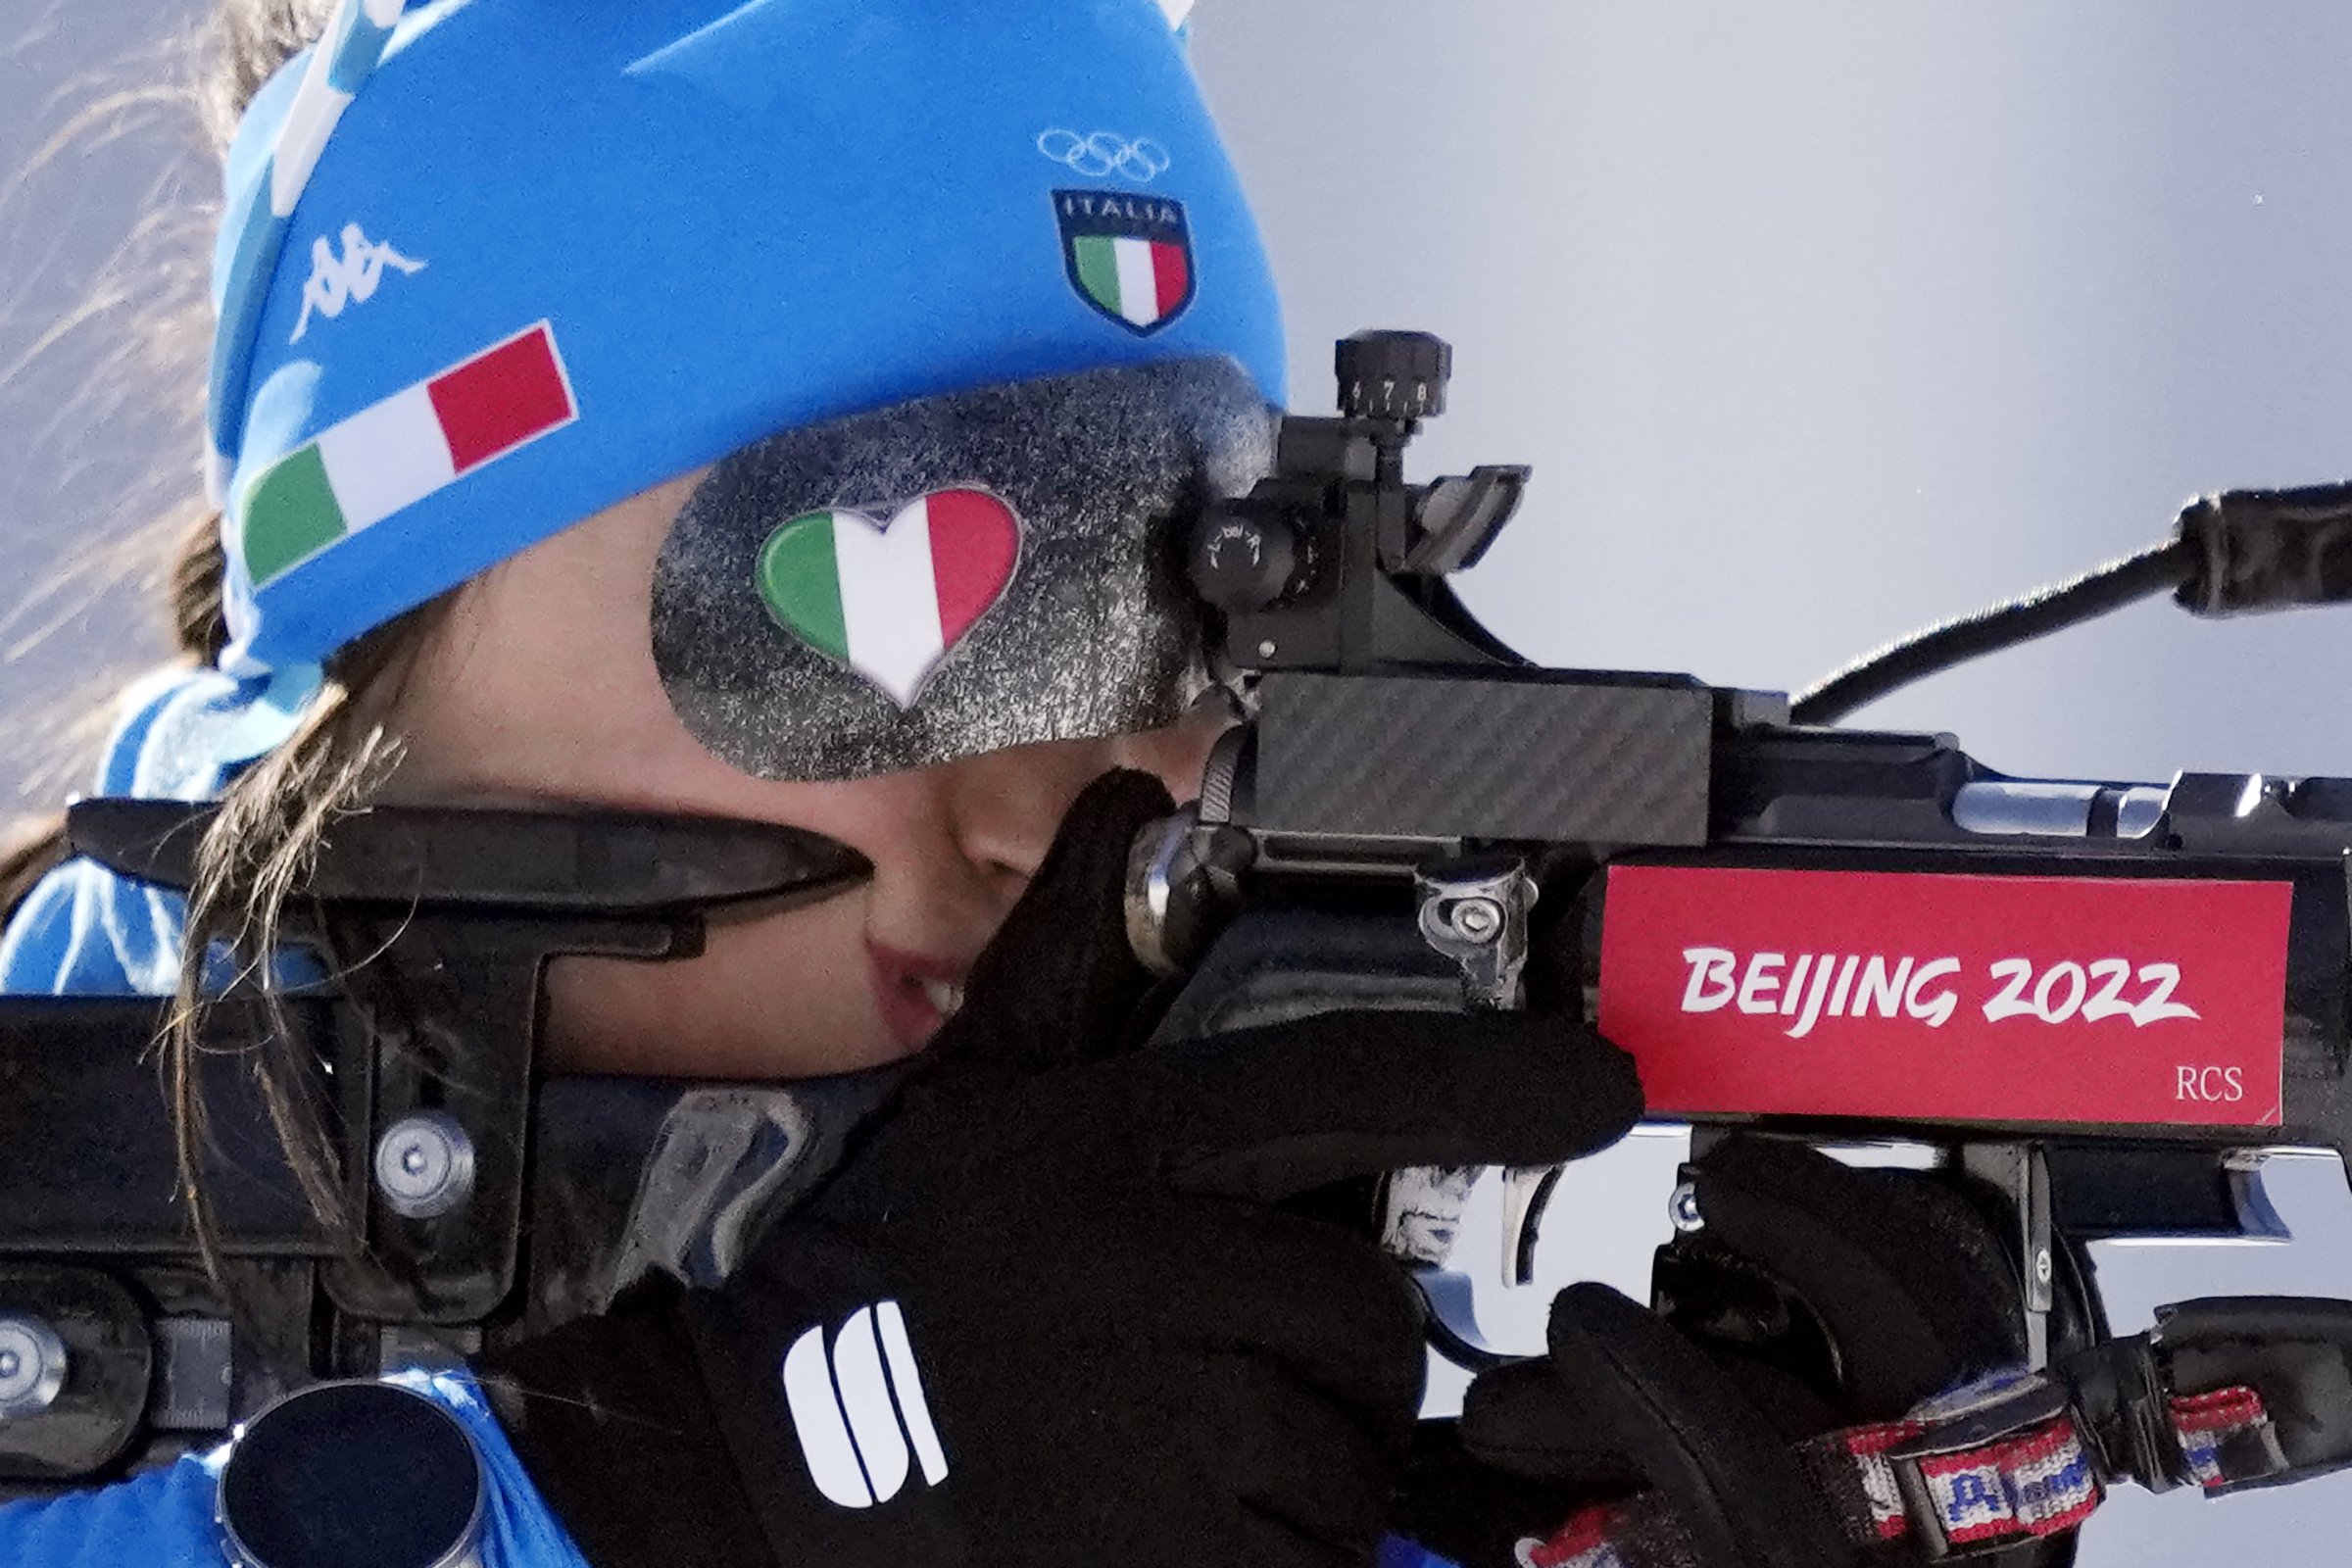  Dorothea Wierer of Italy shoots during zeroing in the women's 12.5-kilometer mass start biathlon at the 2022 Winter Olympics, Friday, Feb. 18, 2022, in Zhangjiakou, China. (AP Photo/Frank Augstein) 